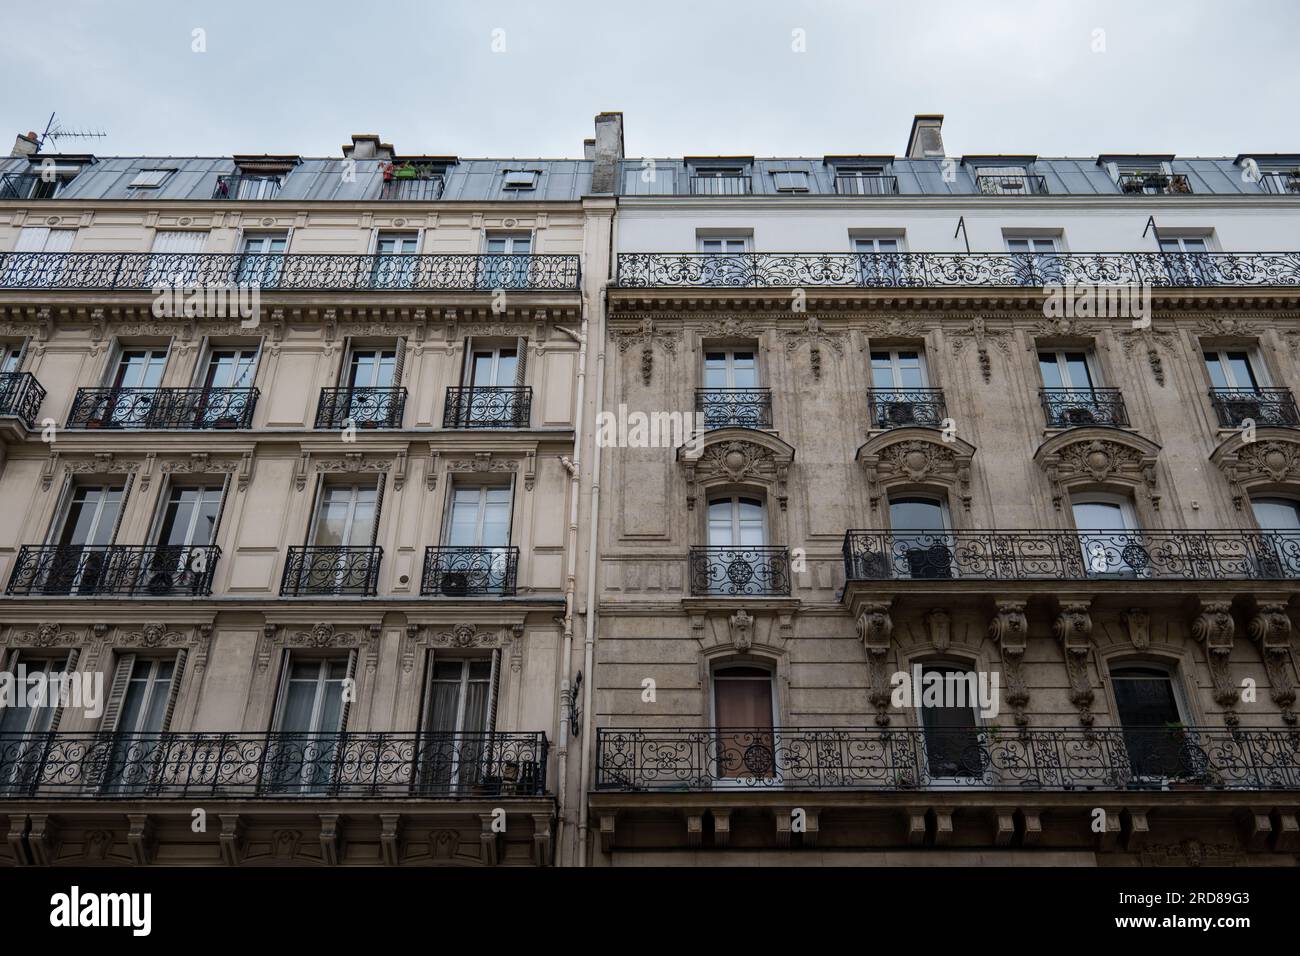 Paris, Île-de-France, France - October 1, 2022: Beautiful Classical Architectural Lafayette Street Residential Buildings With Windows and Balconies Fr Stock Photo